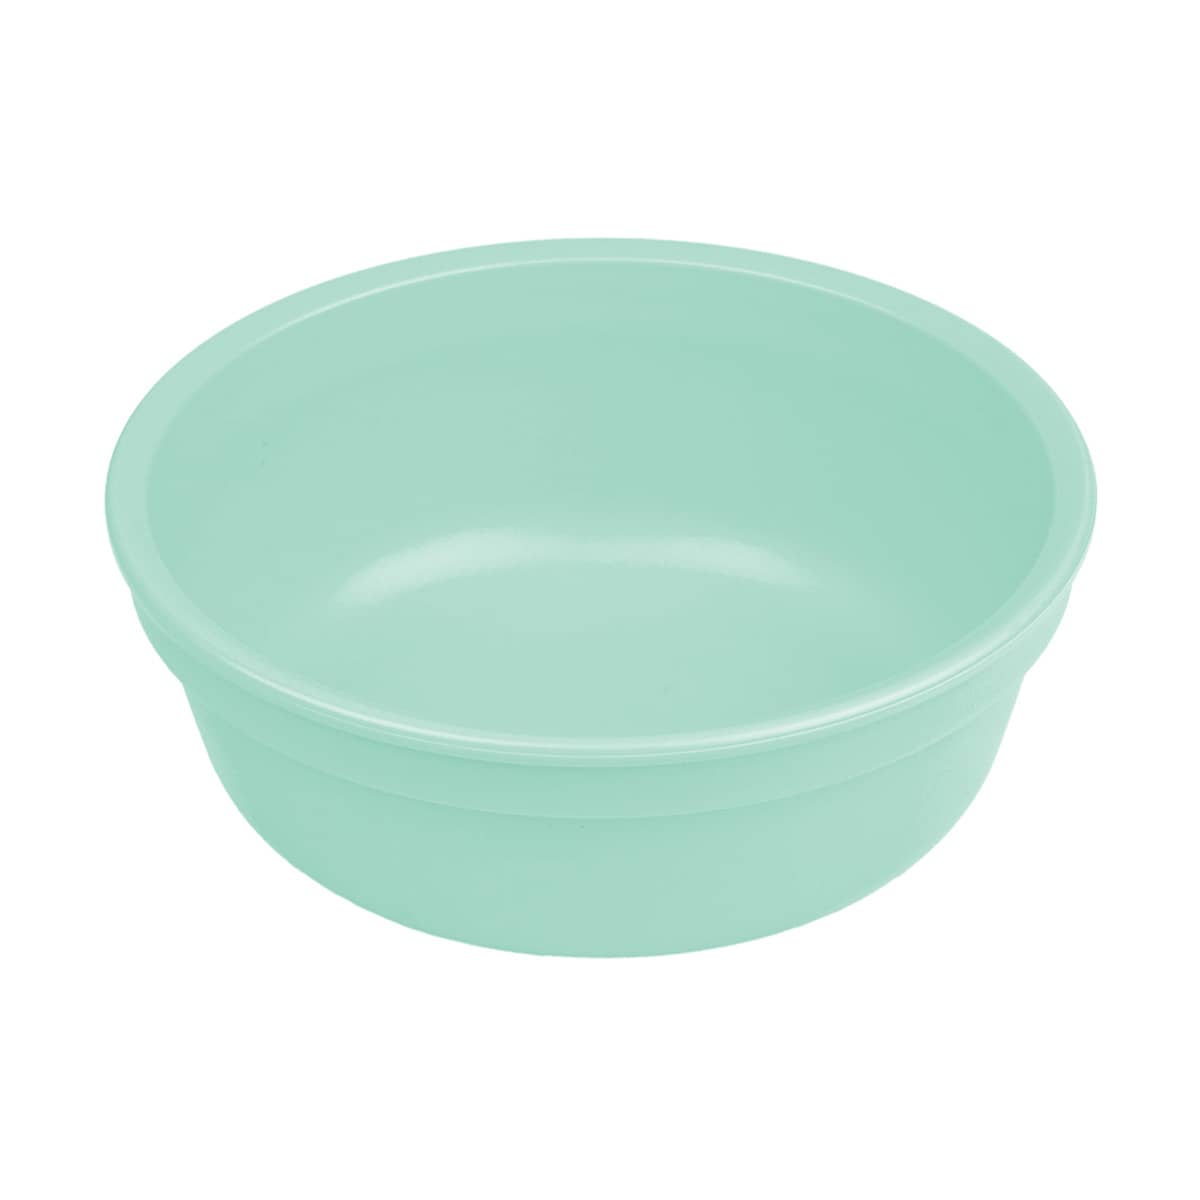 Re-Play Recycled Bowl - Naturals Collection - Mint